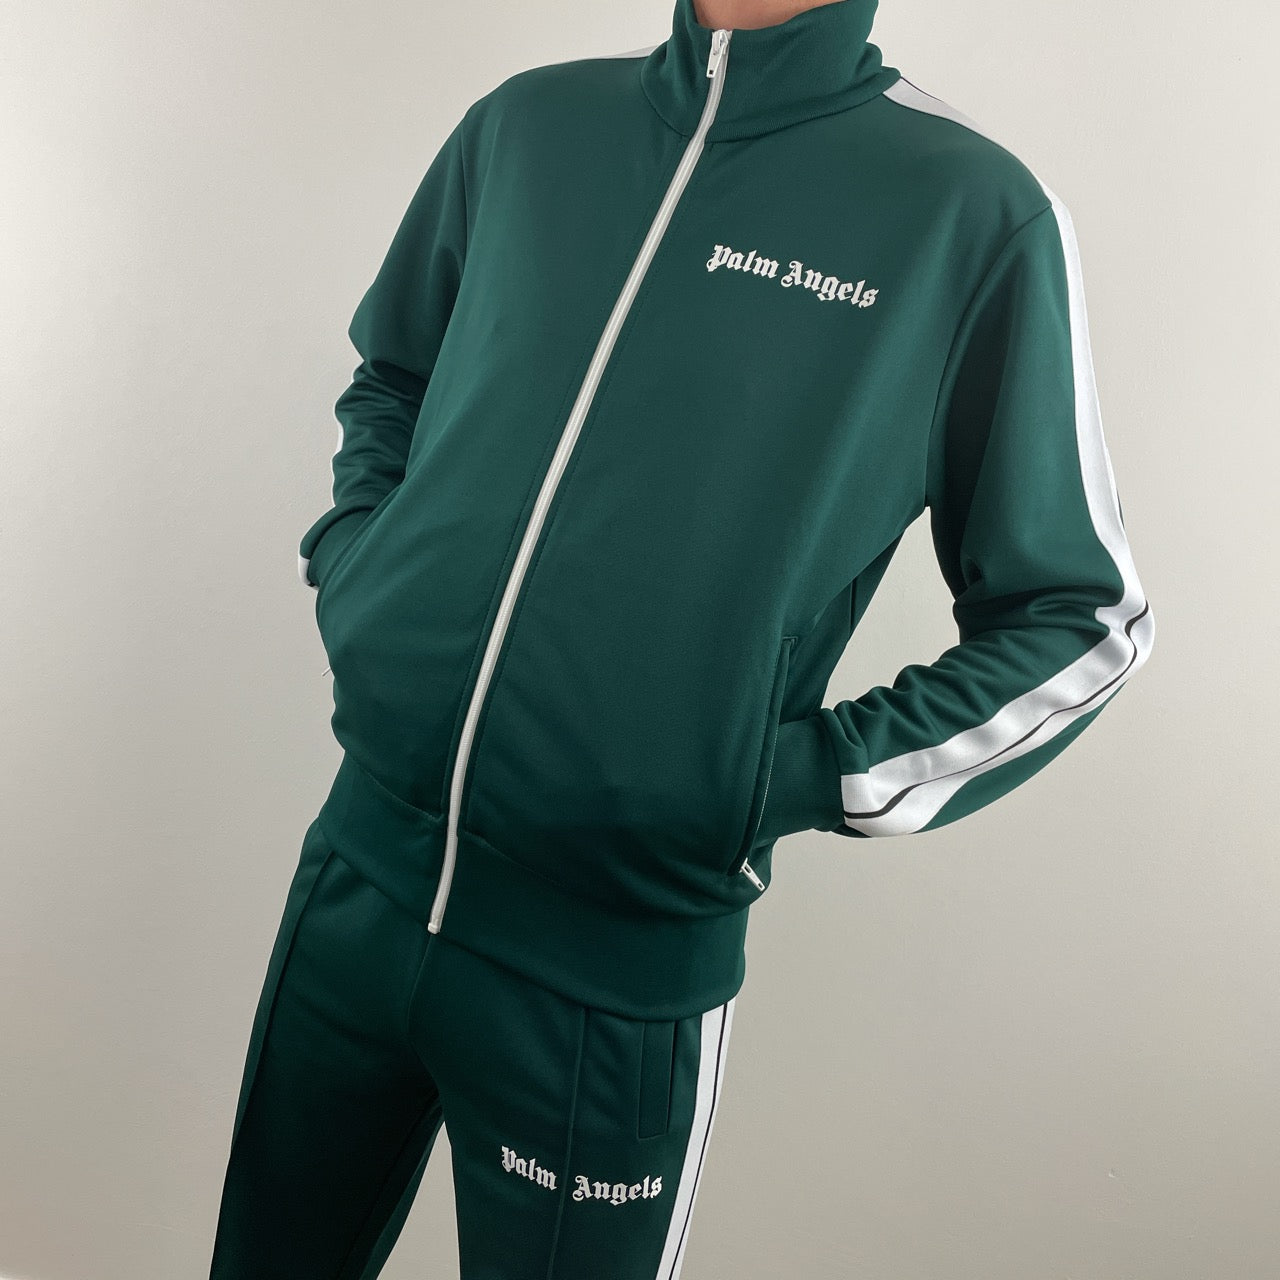 PALM ANGELS TRACKSUIT JACKET GREEN, 57% OFF